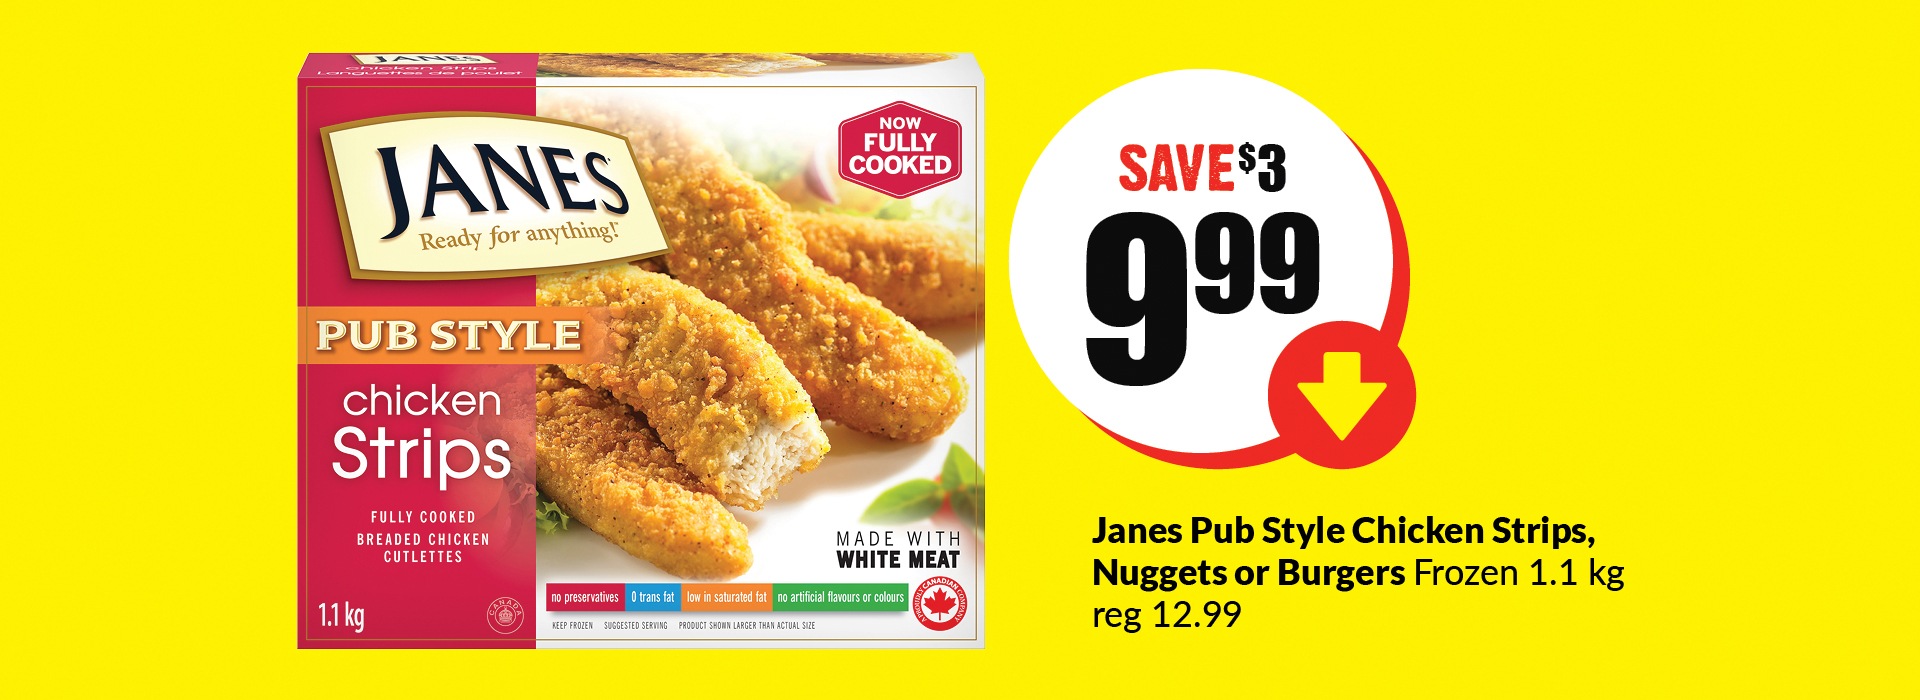 " The following image consists of the text, ""Janes Pub Style Chicken Strips, Nuggeta or Burgers Frozen 1.1kg reg 12.99."""